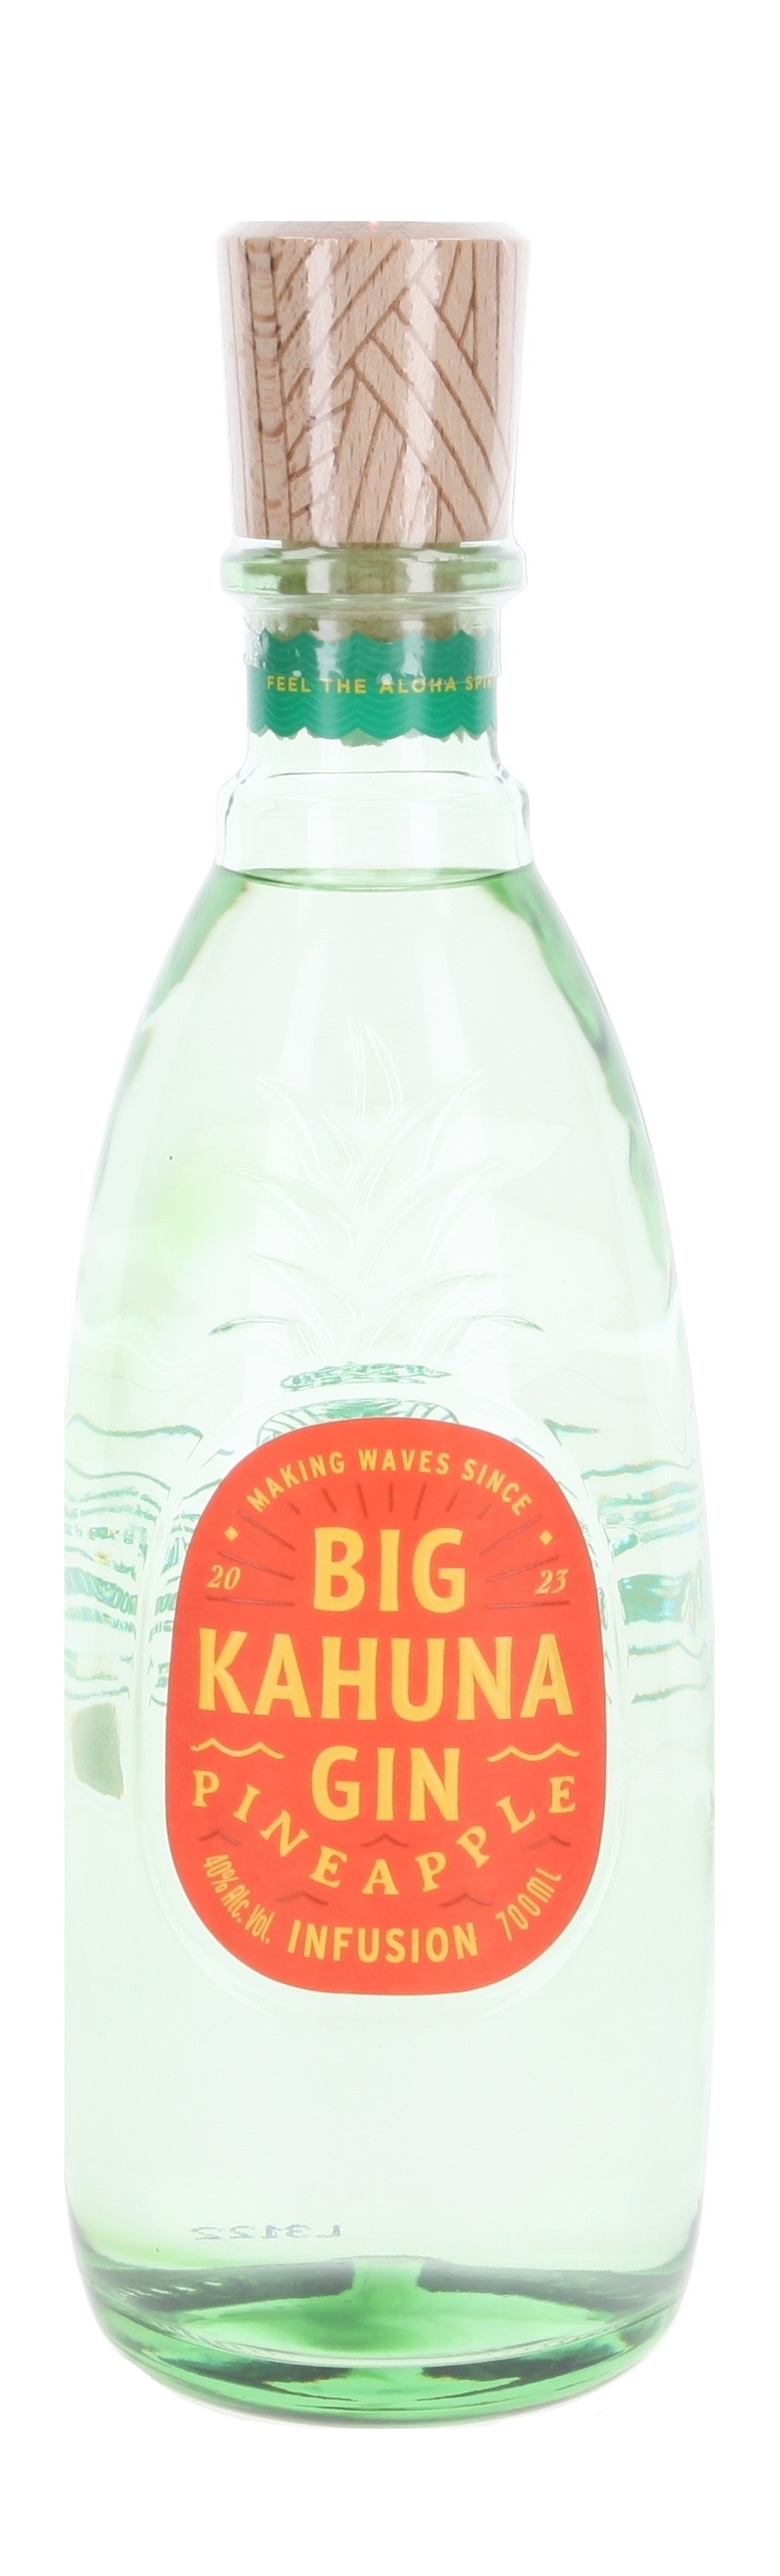 Big Kahuna Gin Pineapple Infusion | Whisky.de » To the online store